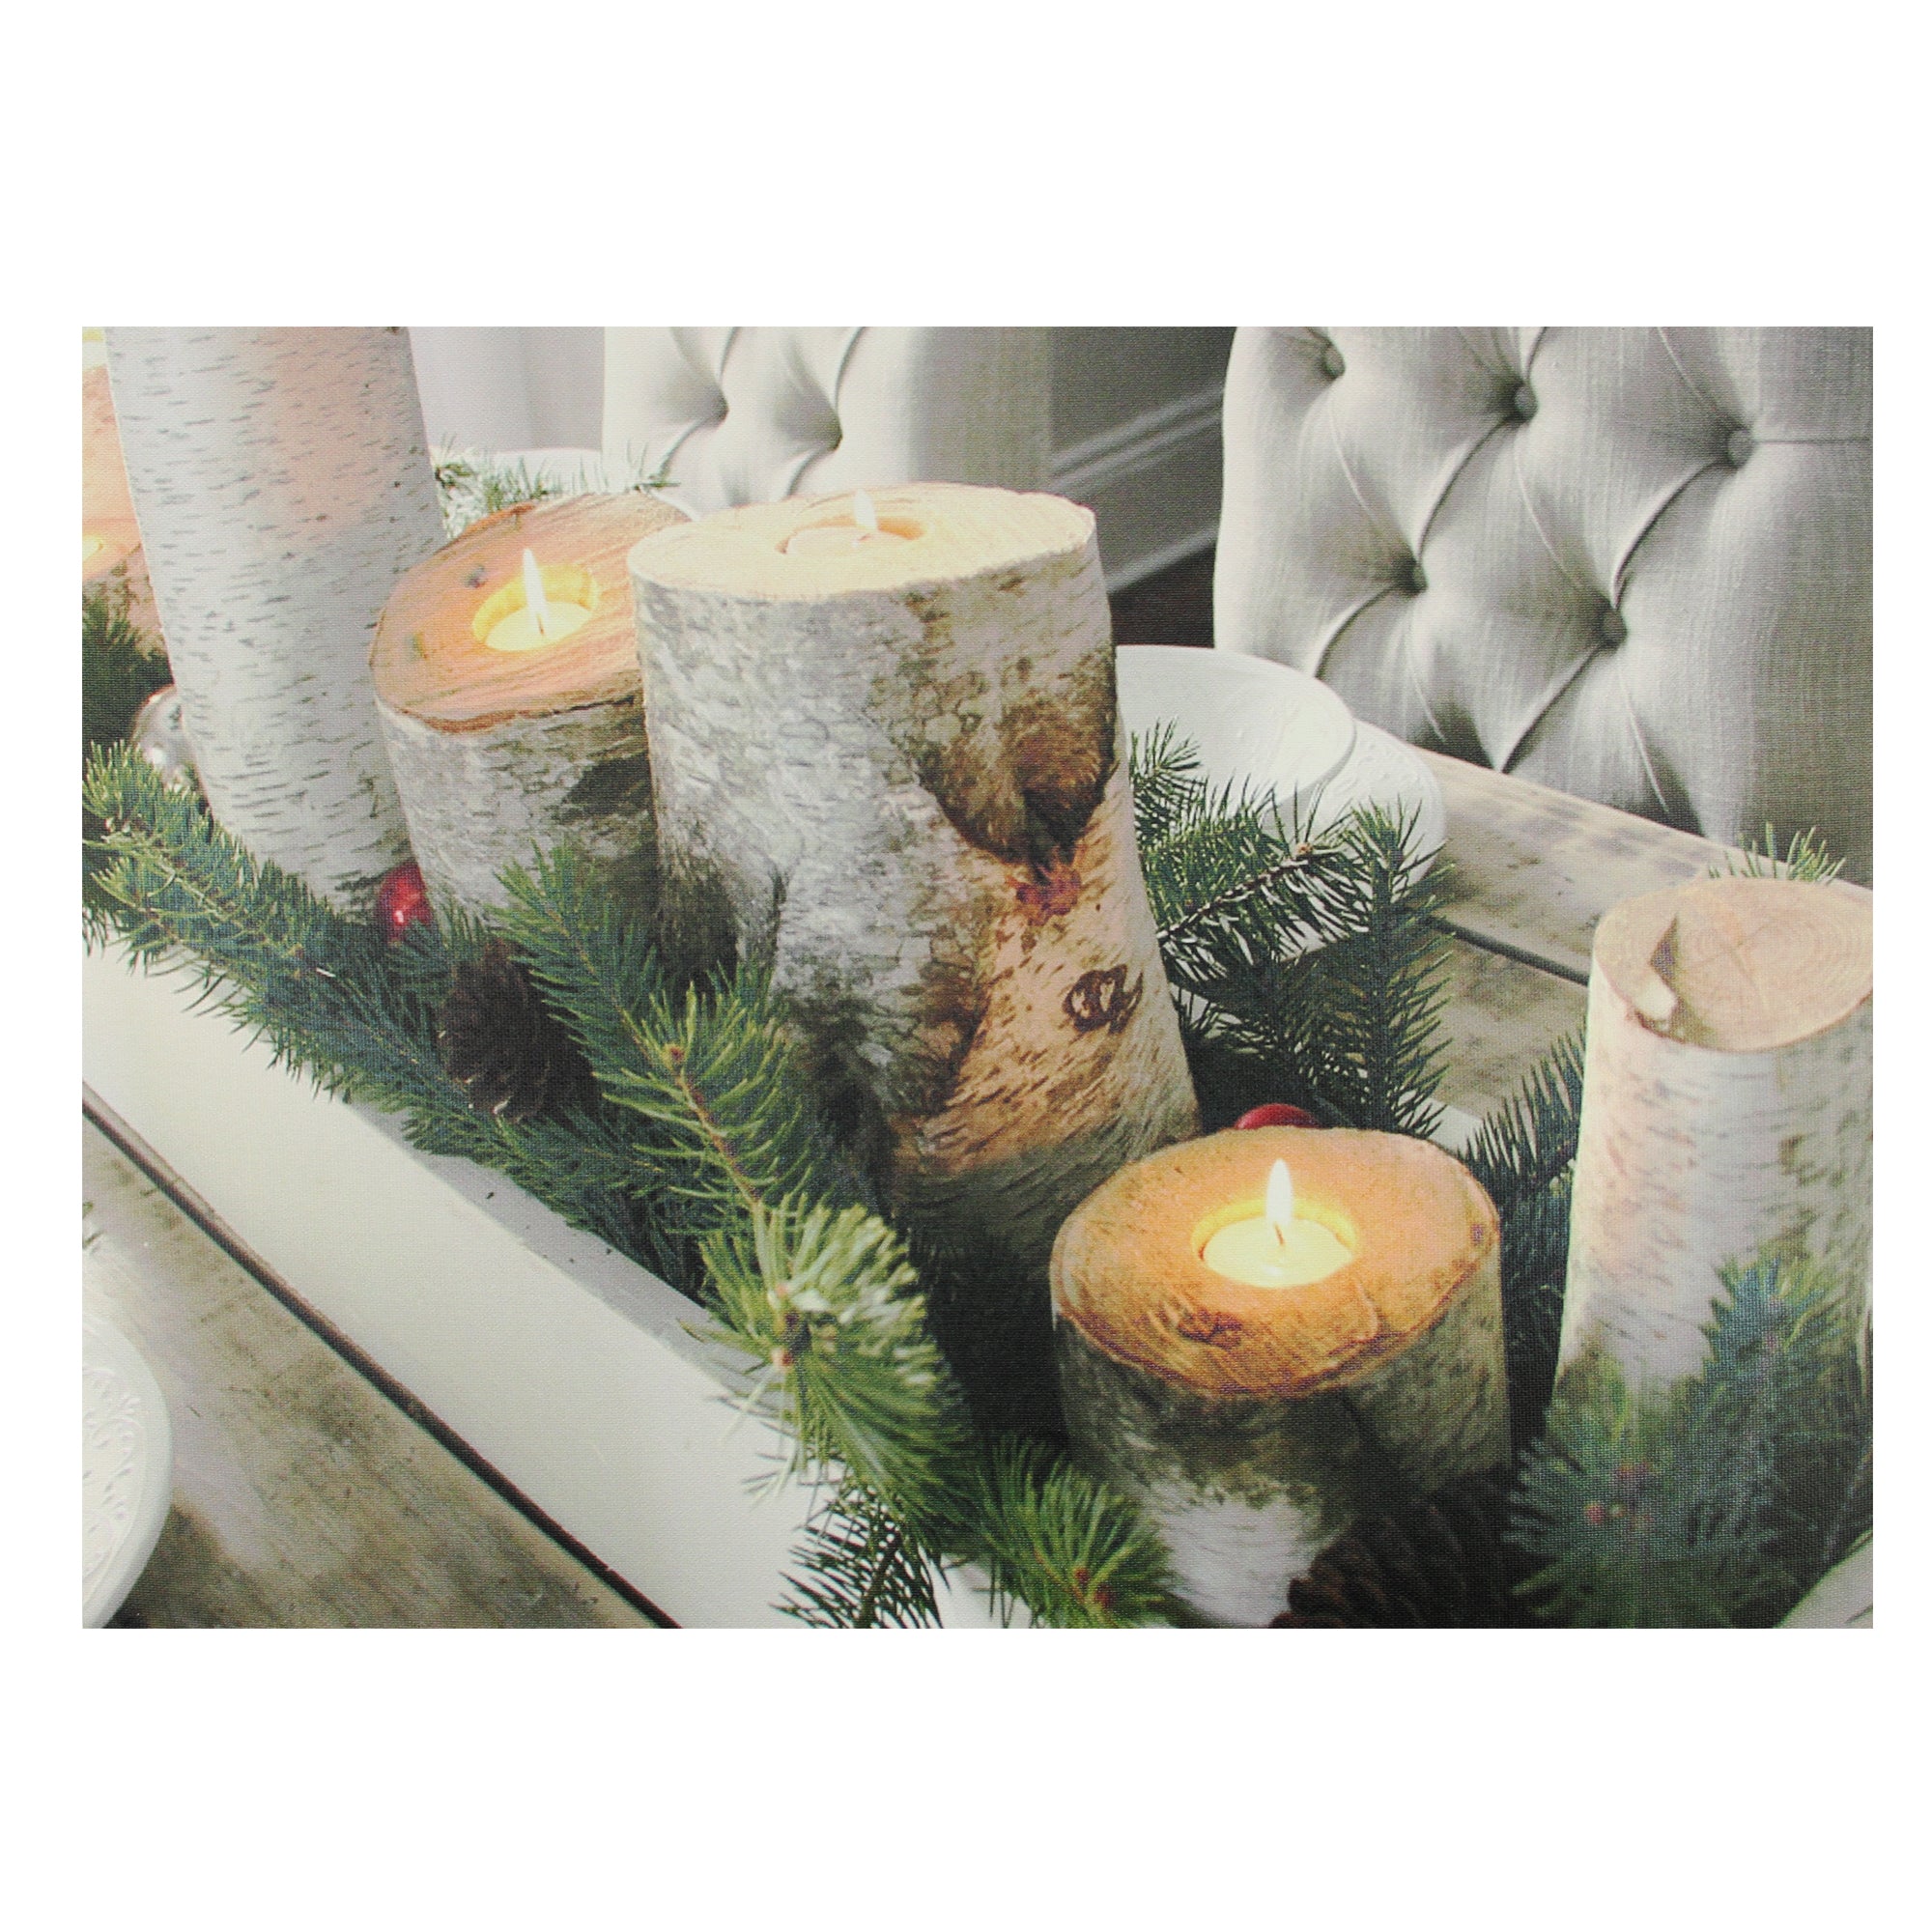 LED Lighted Flickering Rustic Lodge Woodland Birch Candles Christmas Canvas Wall Art 11.75" x 15.75"